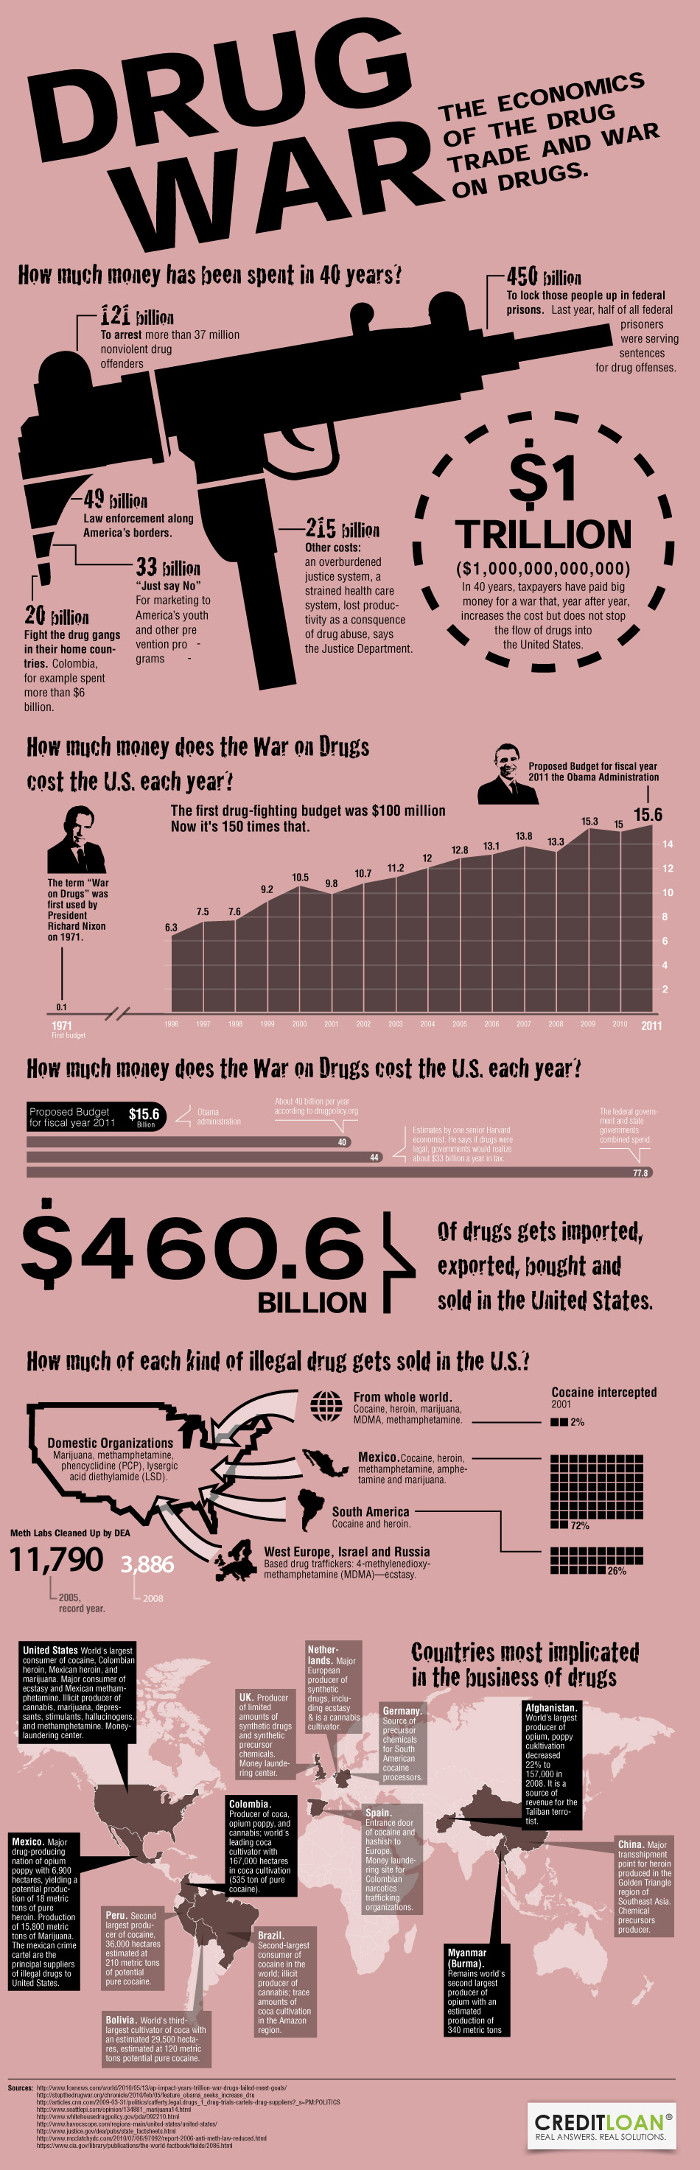 pros and cons of war on drugs